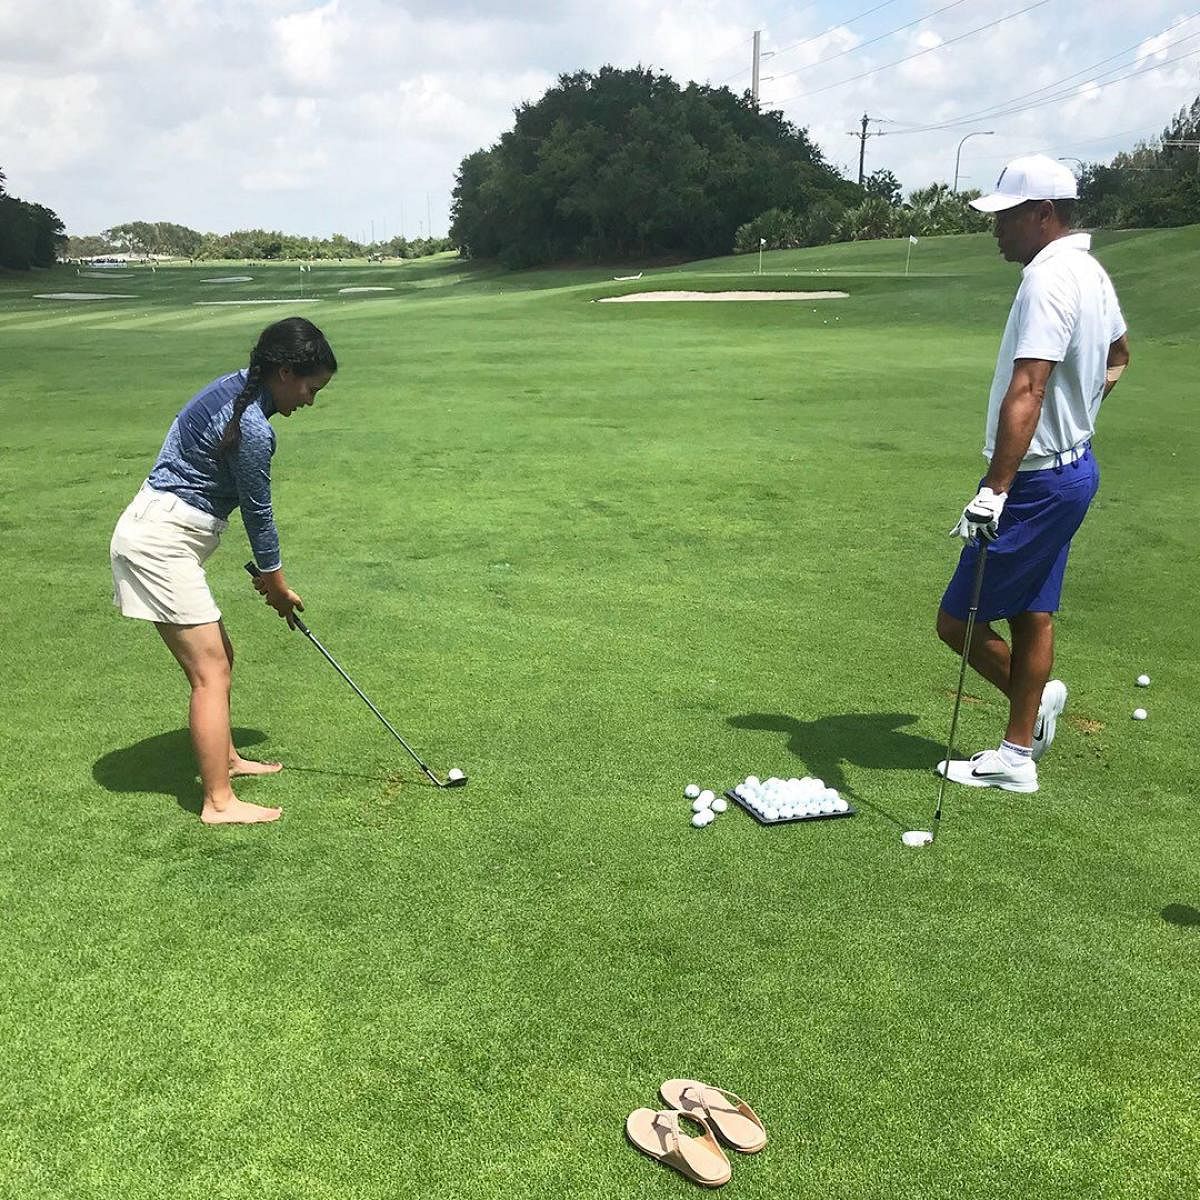 Nepali teen gets golf lesson from Woods